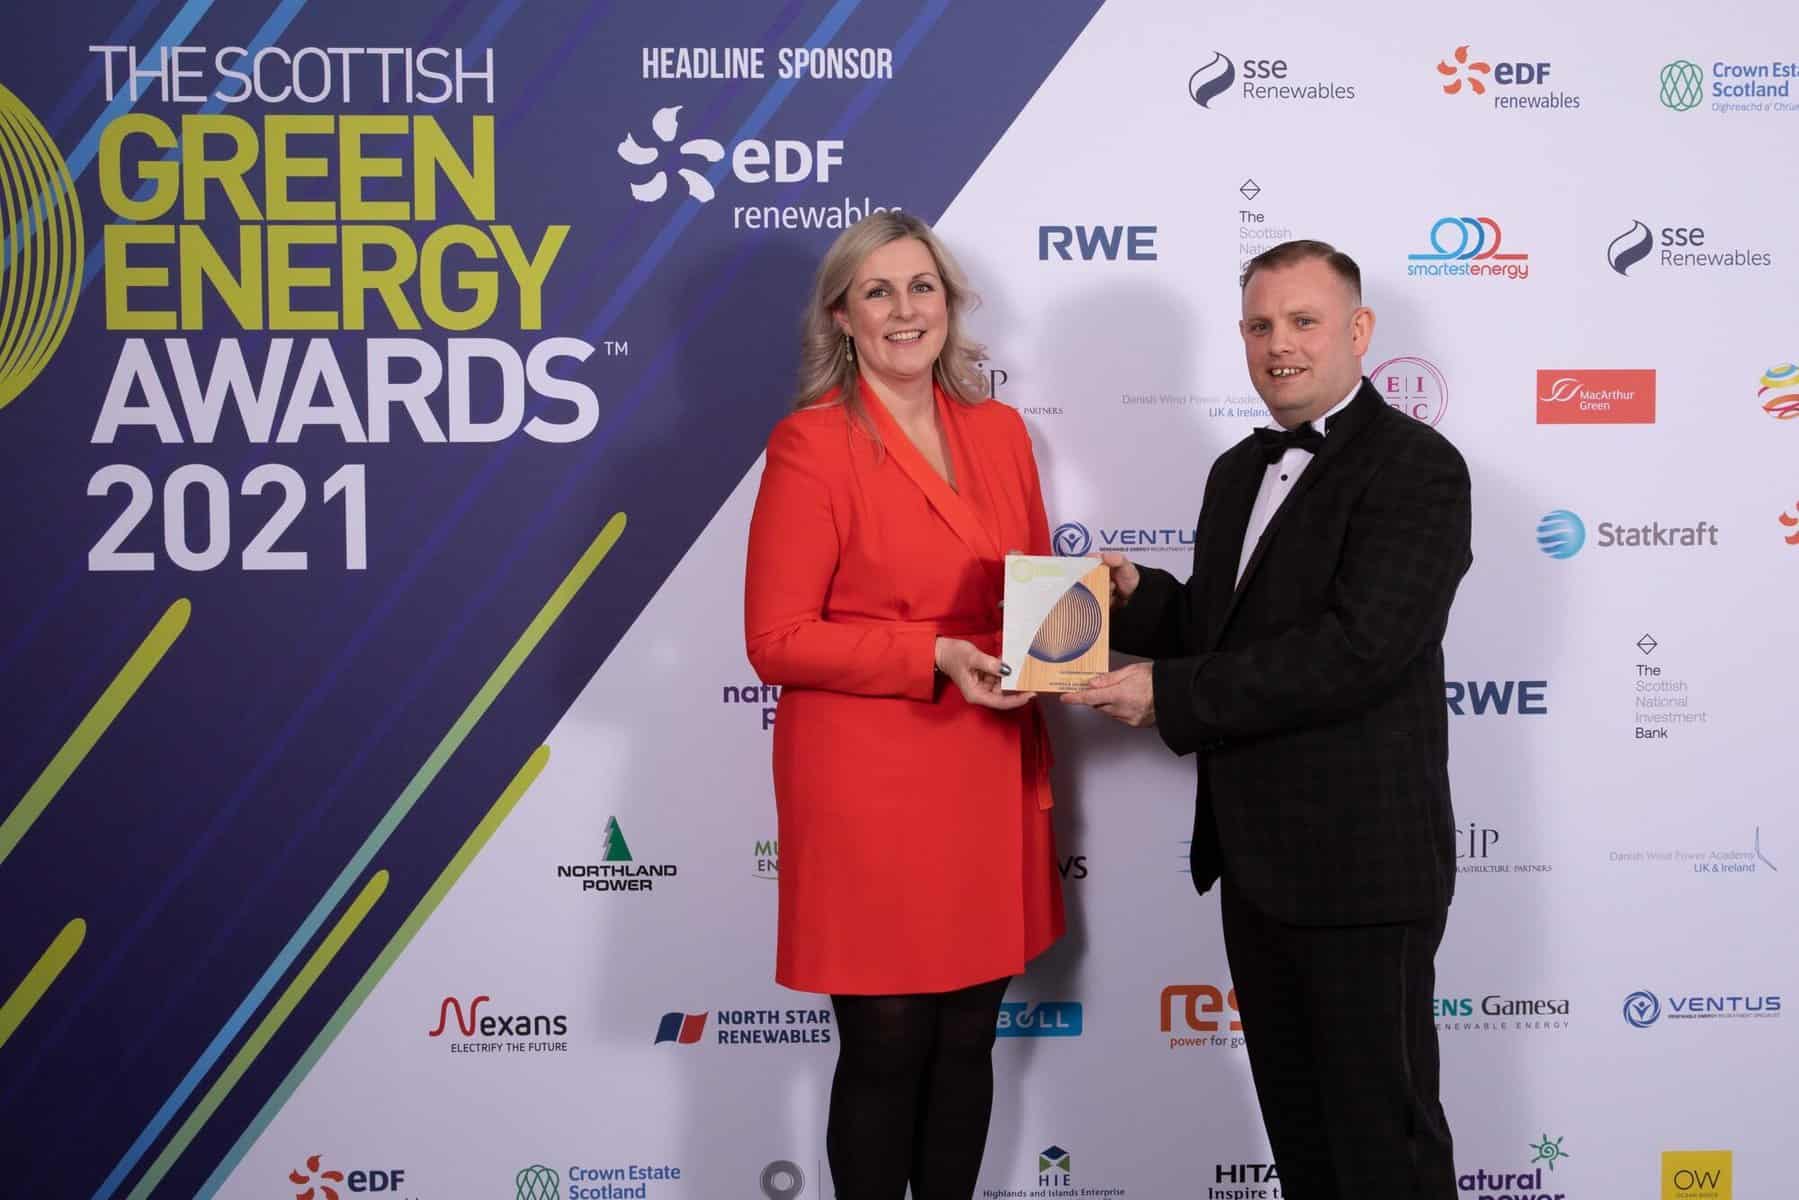 On Thursday 2nd December 2021 the Scottish Green Energy Awards were held at the Edinburgh International Conference Centre with 1100 guests from throughout the renewables energy sector in attendance. The evening was organised by Scottish Renewables, with eDF Renewables as the headline sponsor. The evening was hosted by Jo Caulfield. Pictured is the winner of the Outstanding Project Award won by Dumfries & Galloway College. LHS Joanna Campbell, Dumfries & Galloway College and RHS Billy Currie, Dumfries & Galloway College.